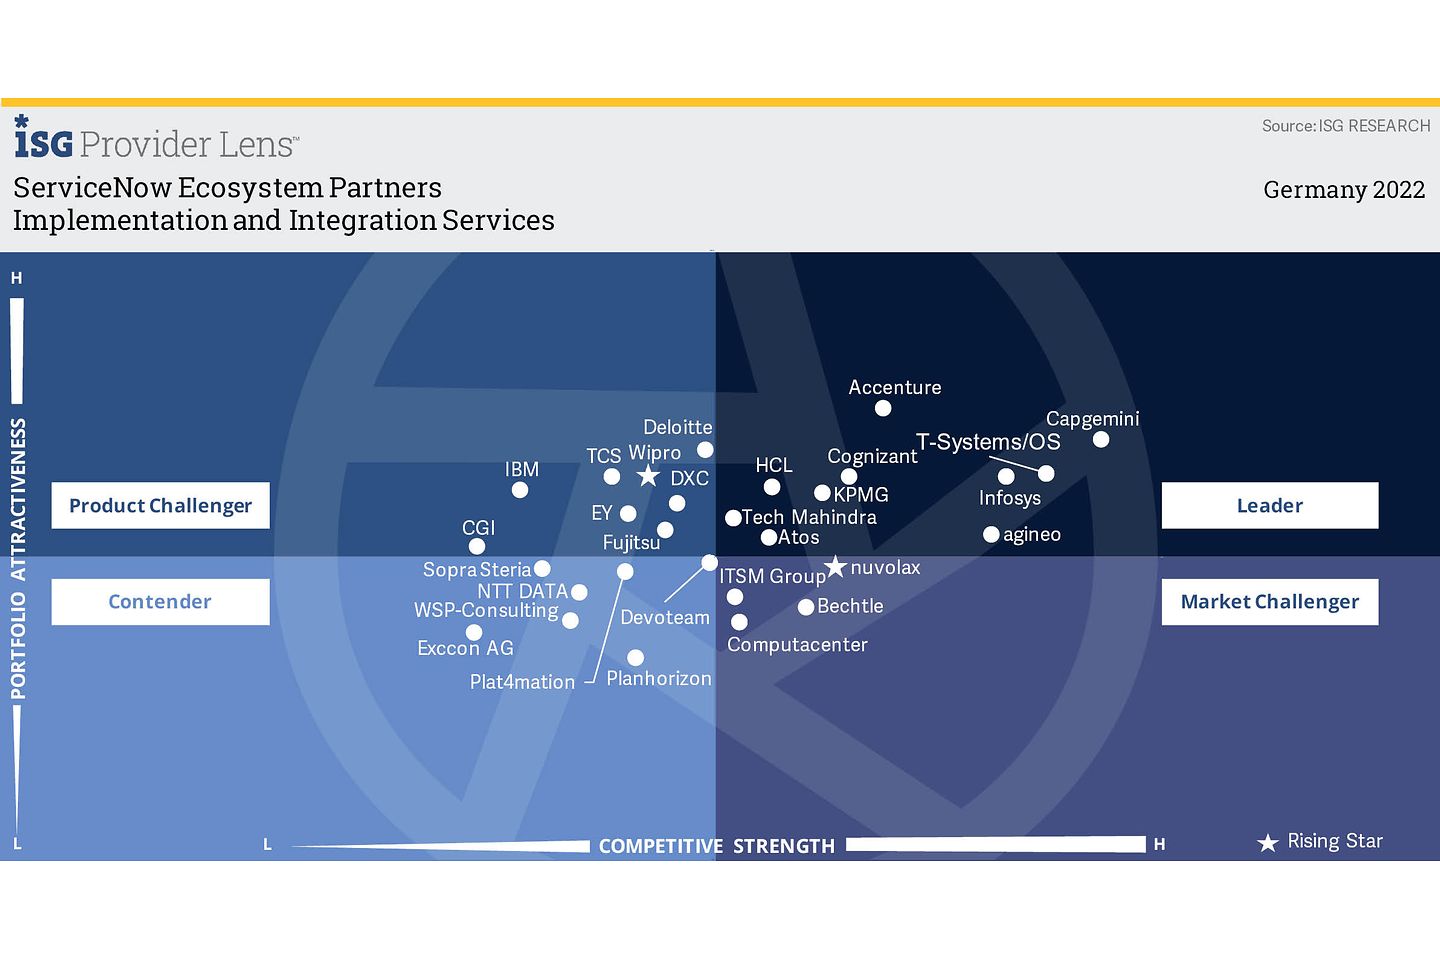 ISG Provider Lens ServiceNow Ecosystem Partners Implementation and Integration Services